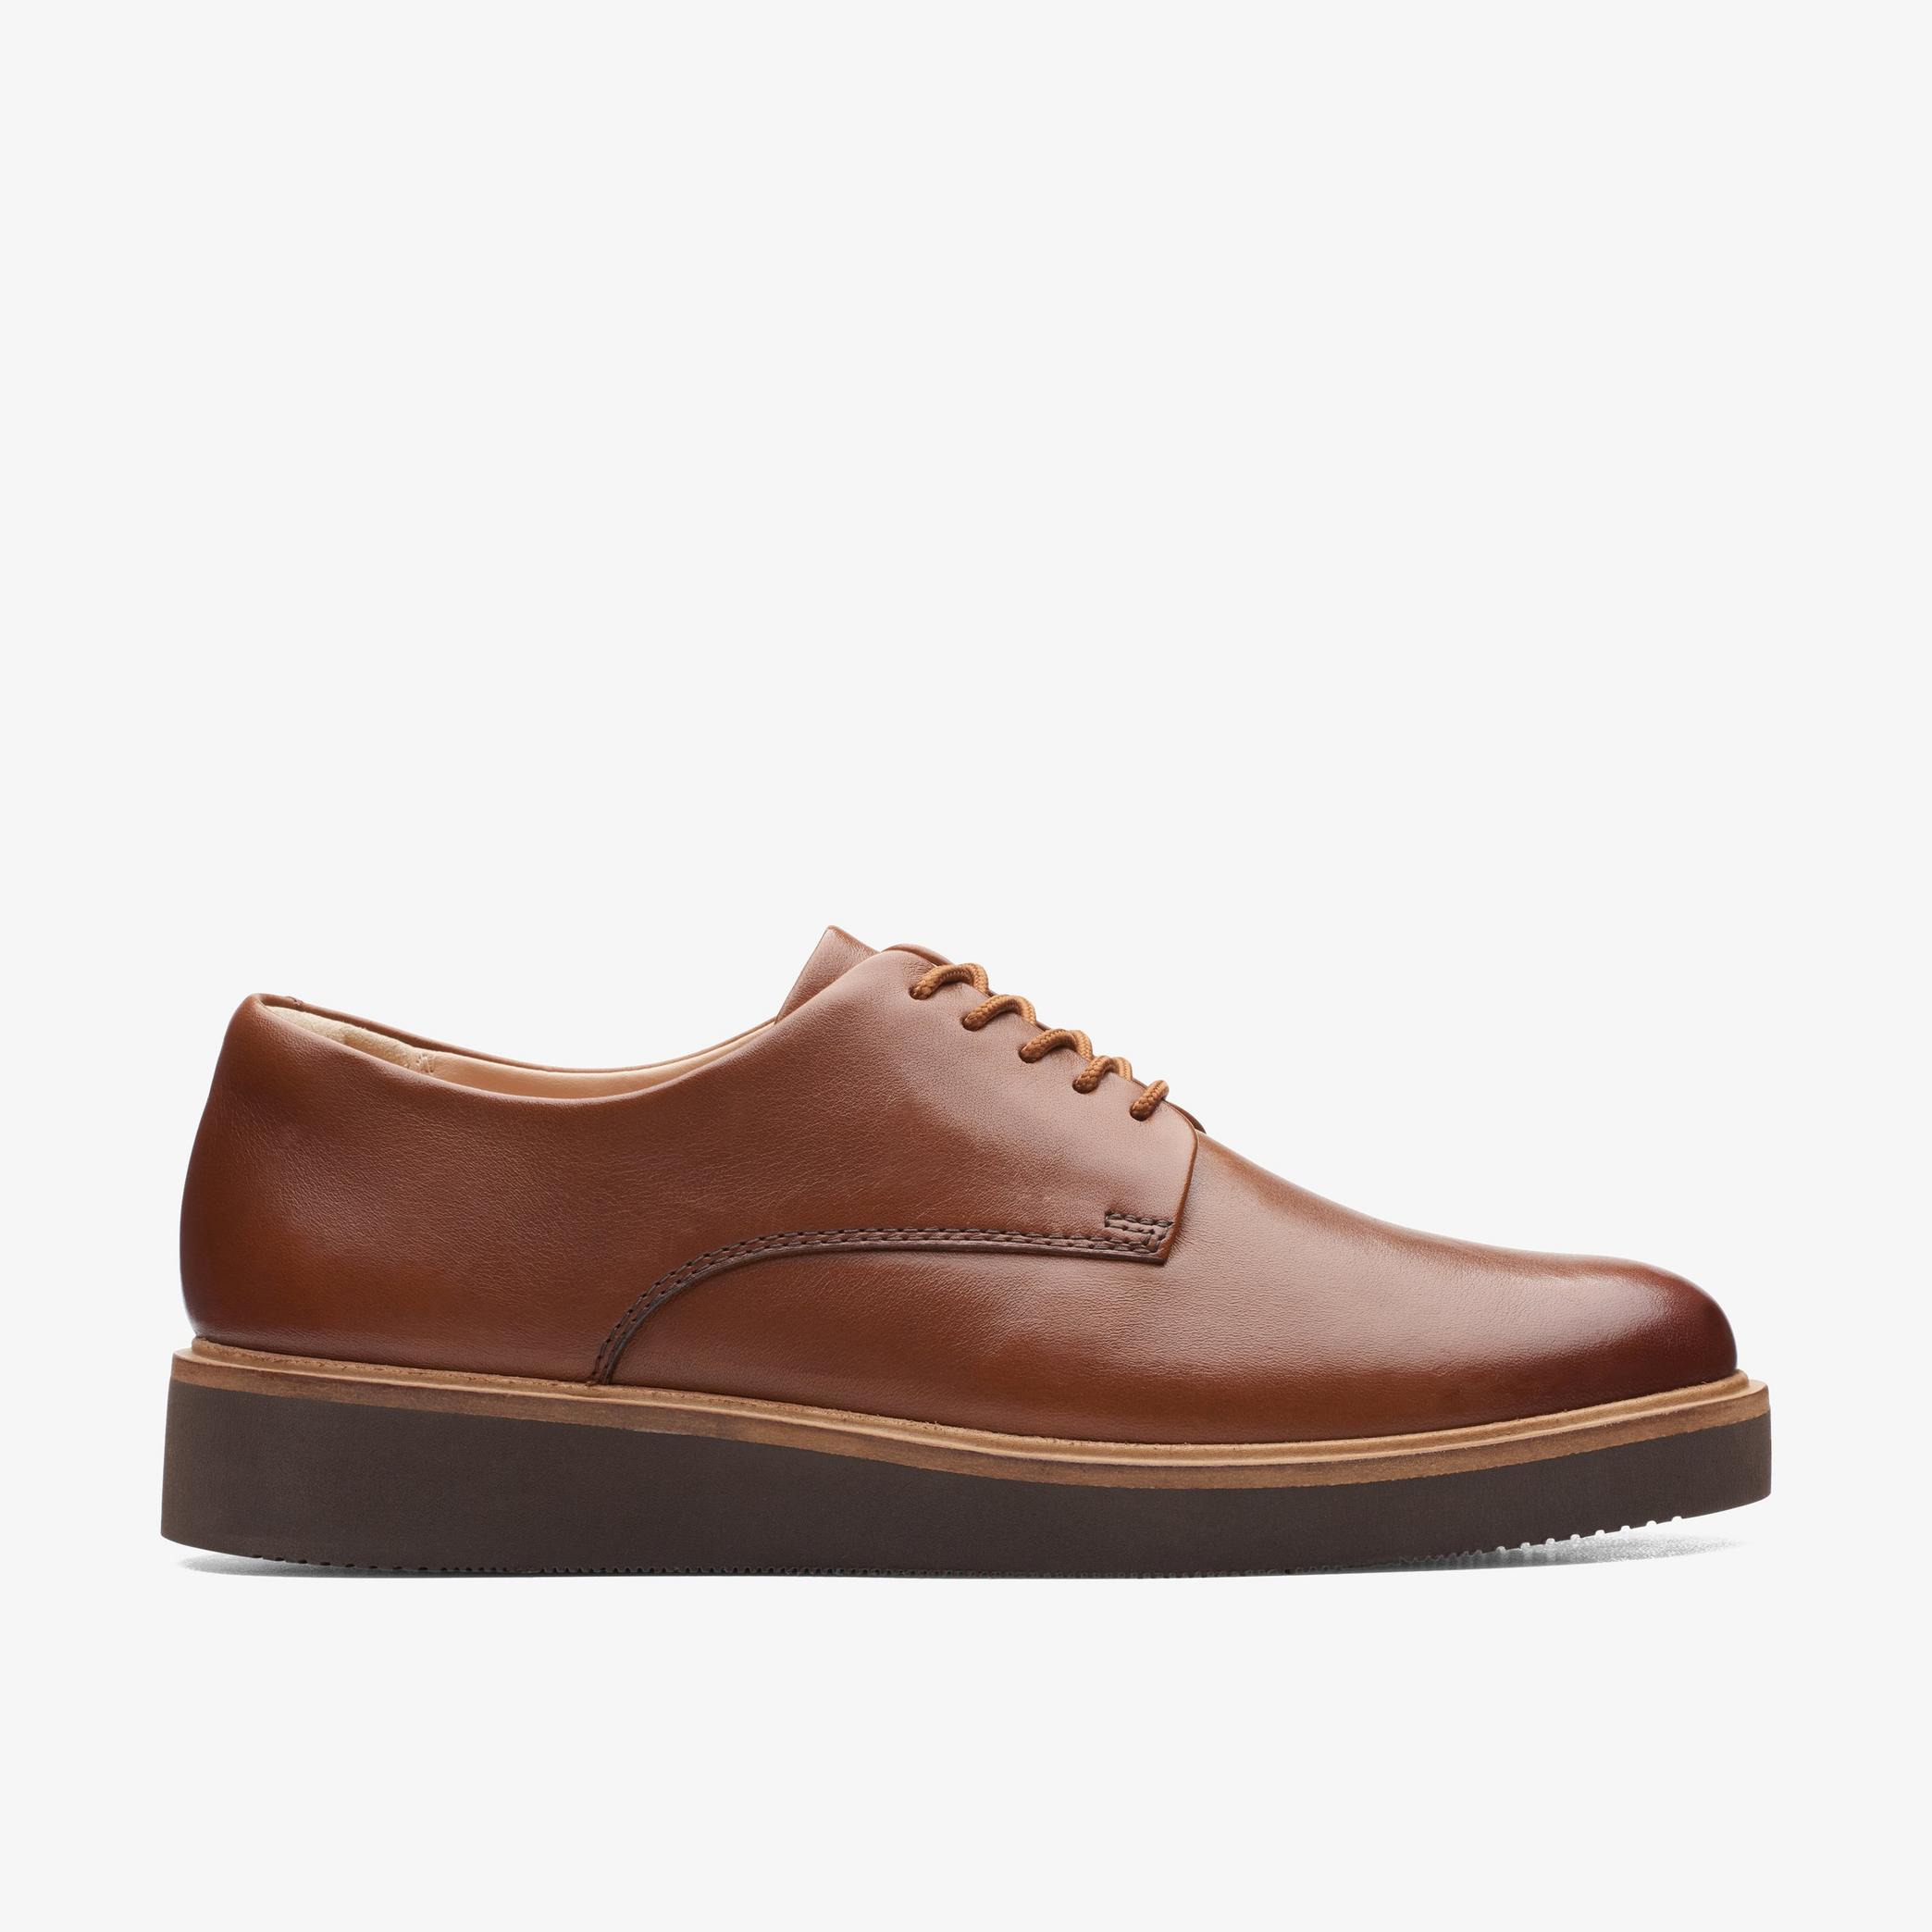 Glickly Derby Dark Tan Leather Derby Shoe, view 1 of 6